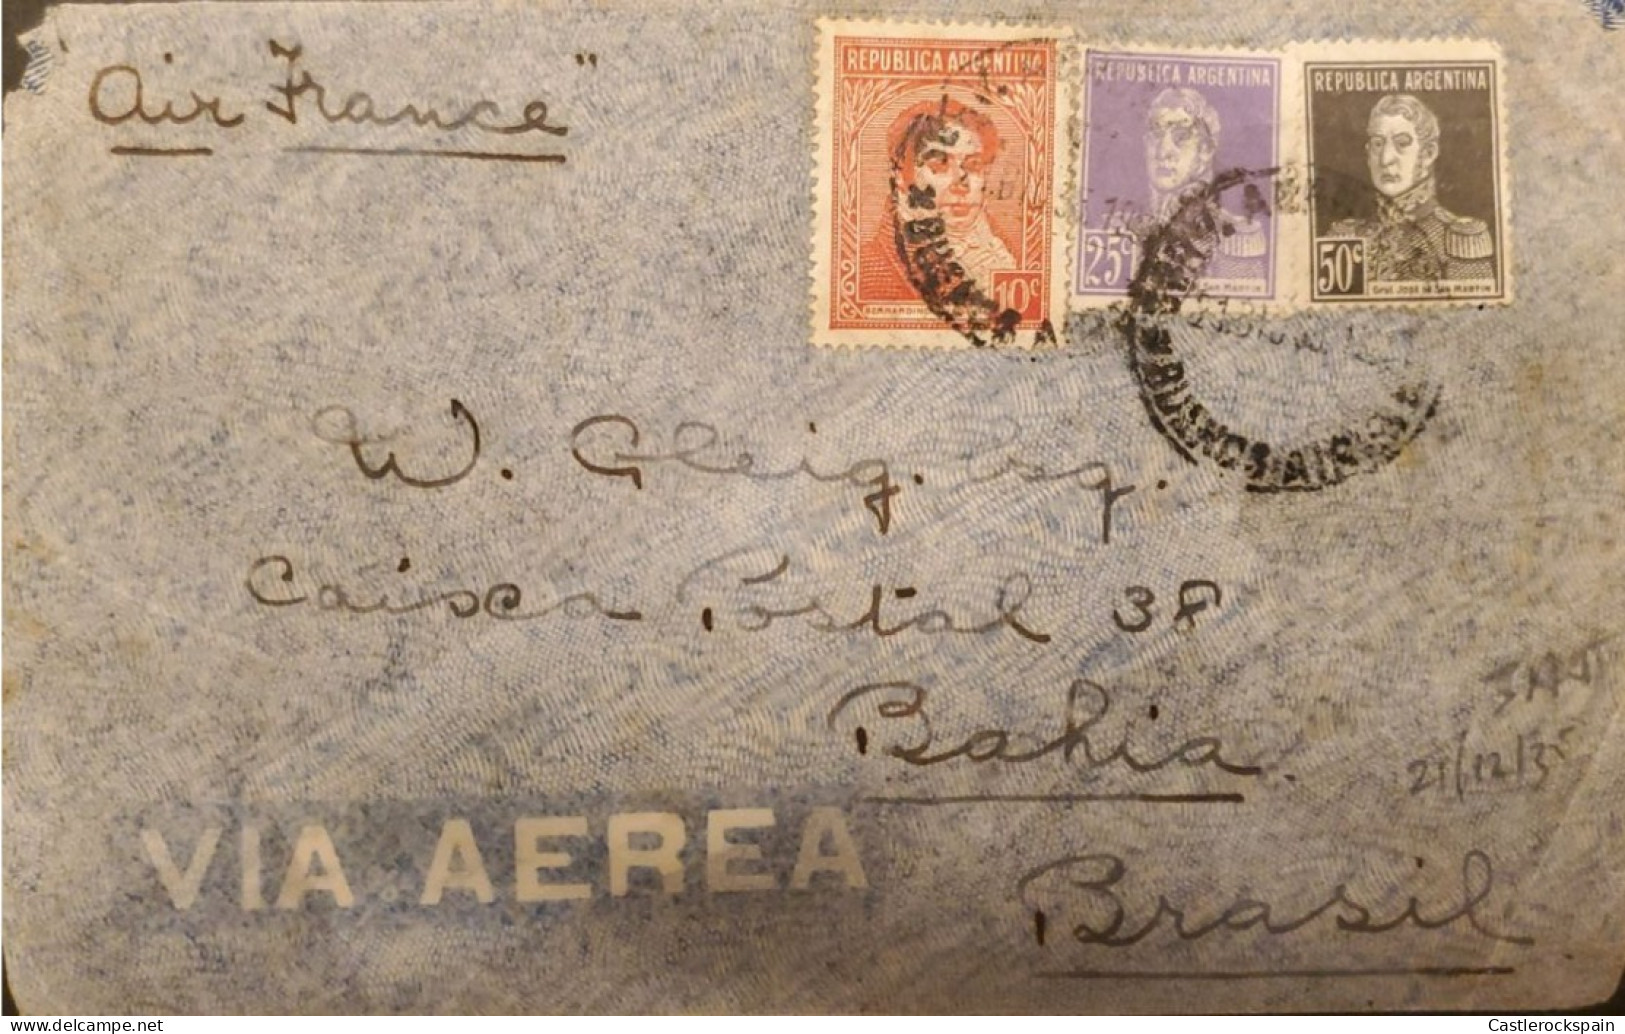 MI) 1935, ARGENTINA, AIR FRANCE, FROM BUENOS AIRES TO BAHIA - BRAZIL, AIR MAIL, GRAL SAN MARTIN AND RIVADAVIA STAMPS - Oblitérés